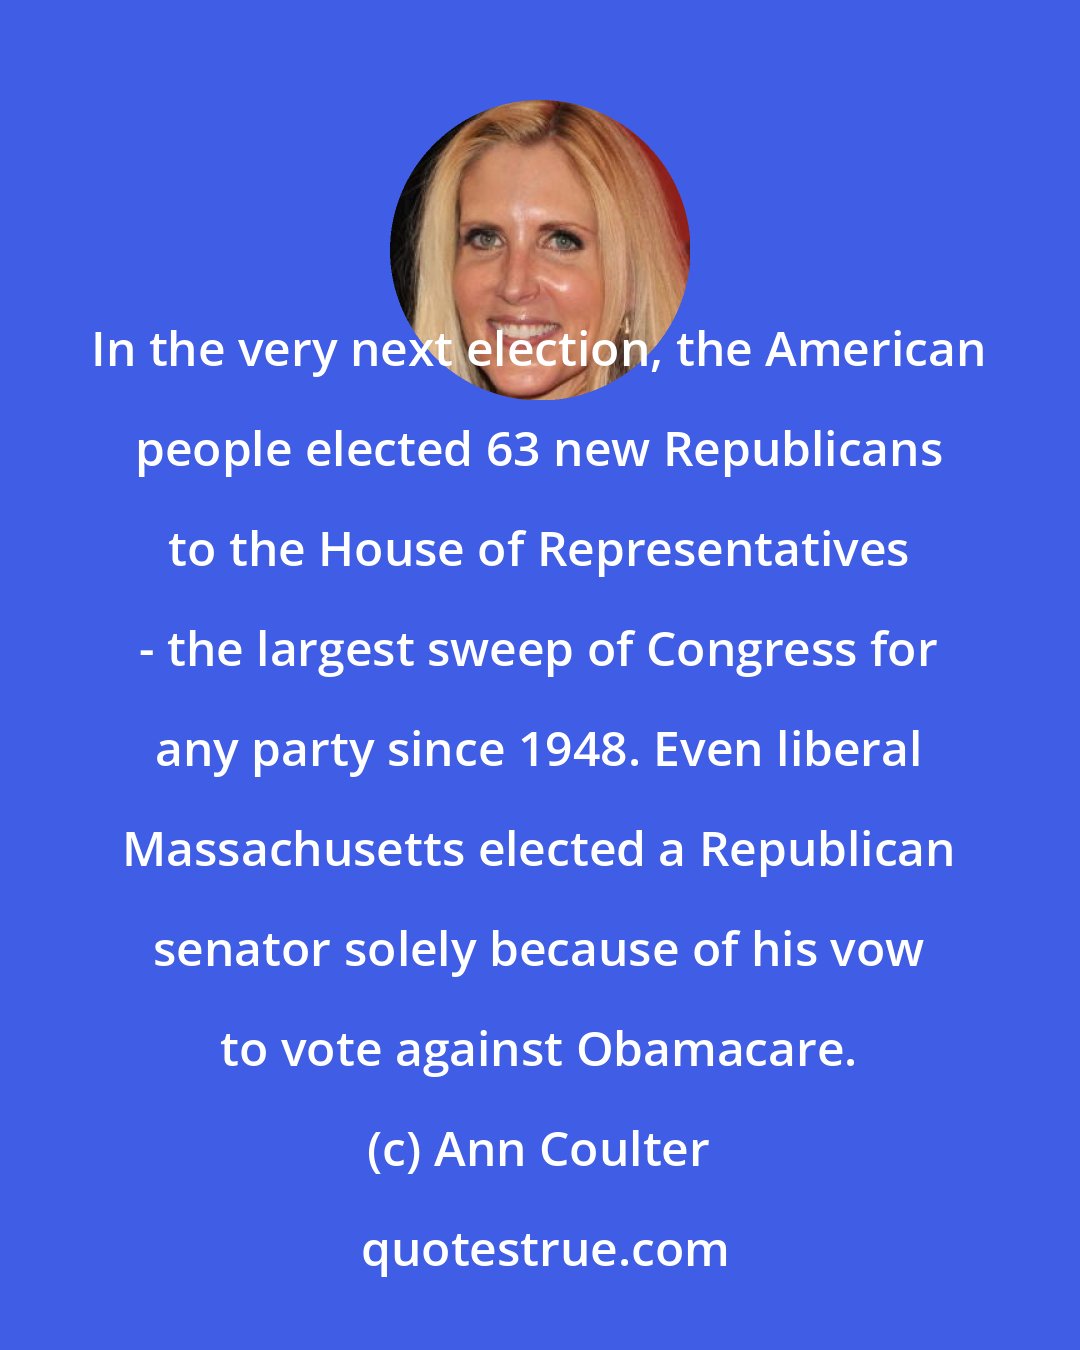 Ann Coulter: In the very next election, the American people elected 63 new Republicans to the House of Representatives - the largest sweep of Congress for any party since 1948. Even liberal Massachusetts elected a Republican senator solely because of his vow to vote against Obamacare.